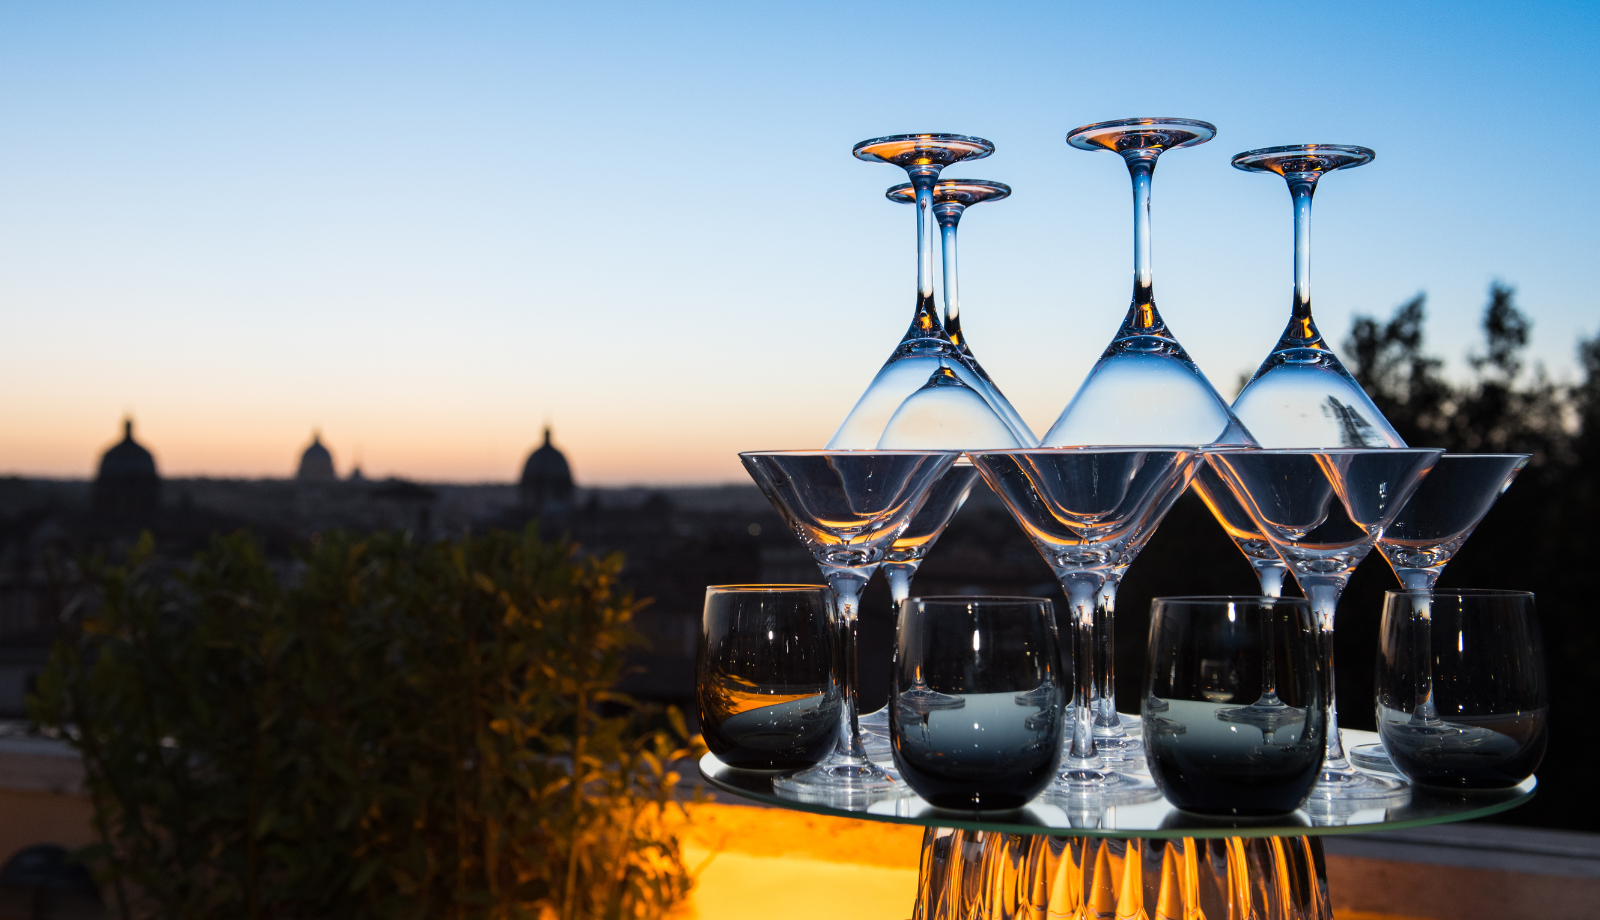 a stack of martini glasses on an outdoor table at dusk. The City scape in the background